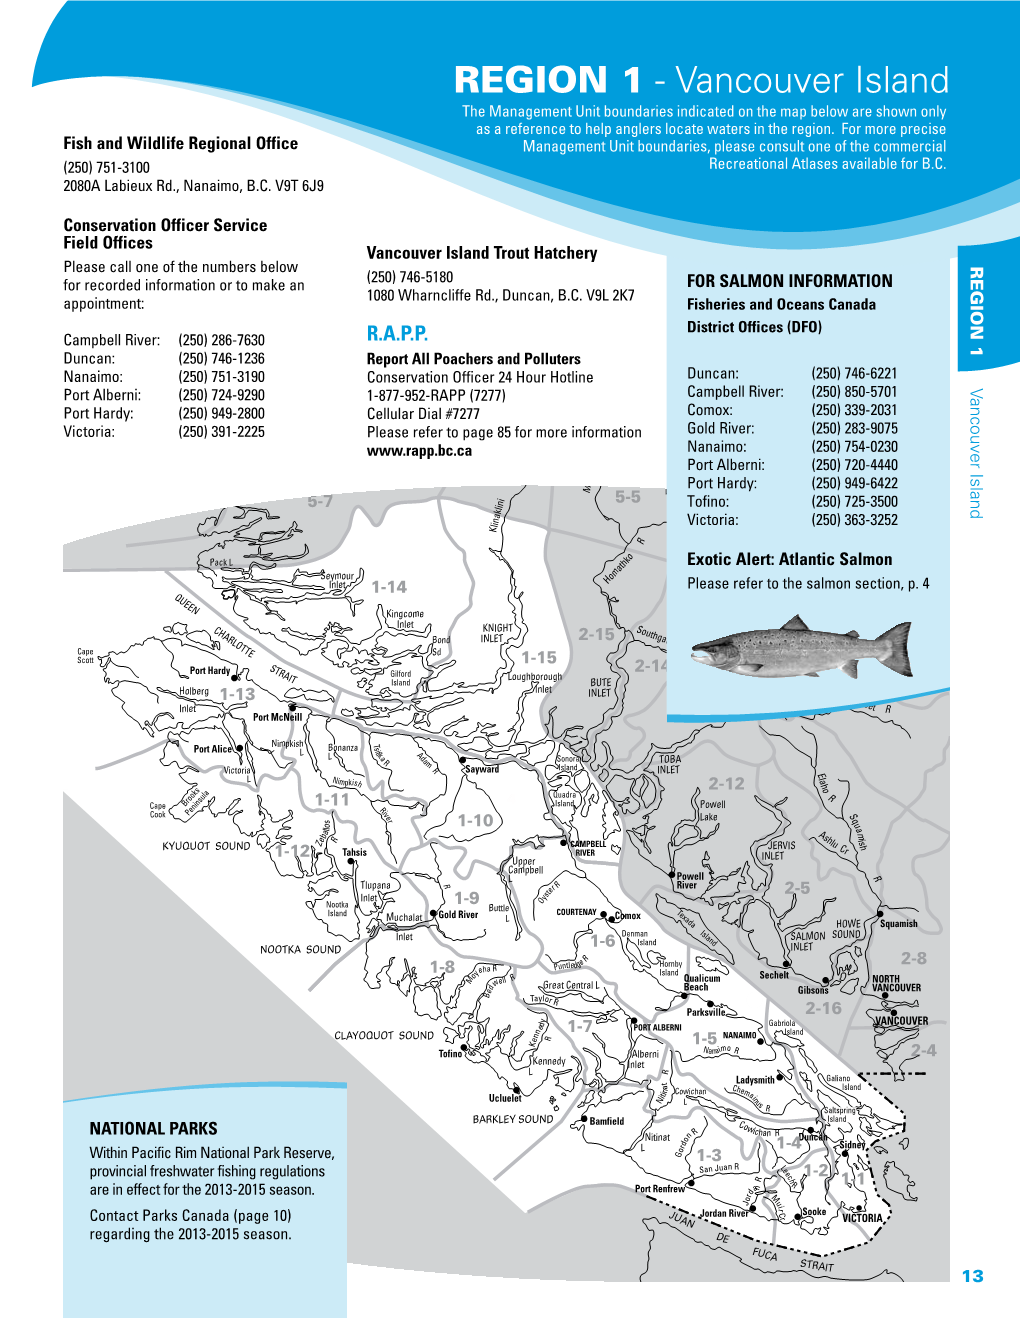 REGION 1 - Vancouver Island the Management Unit Boundaries Indicated on the Map Below Are Shown Only As a Reference to Help Anglers Locate Waters in the Region